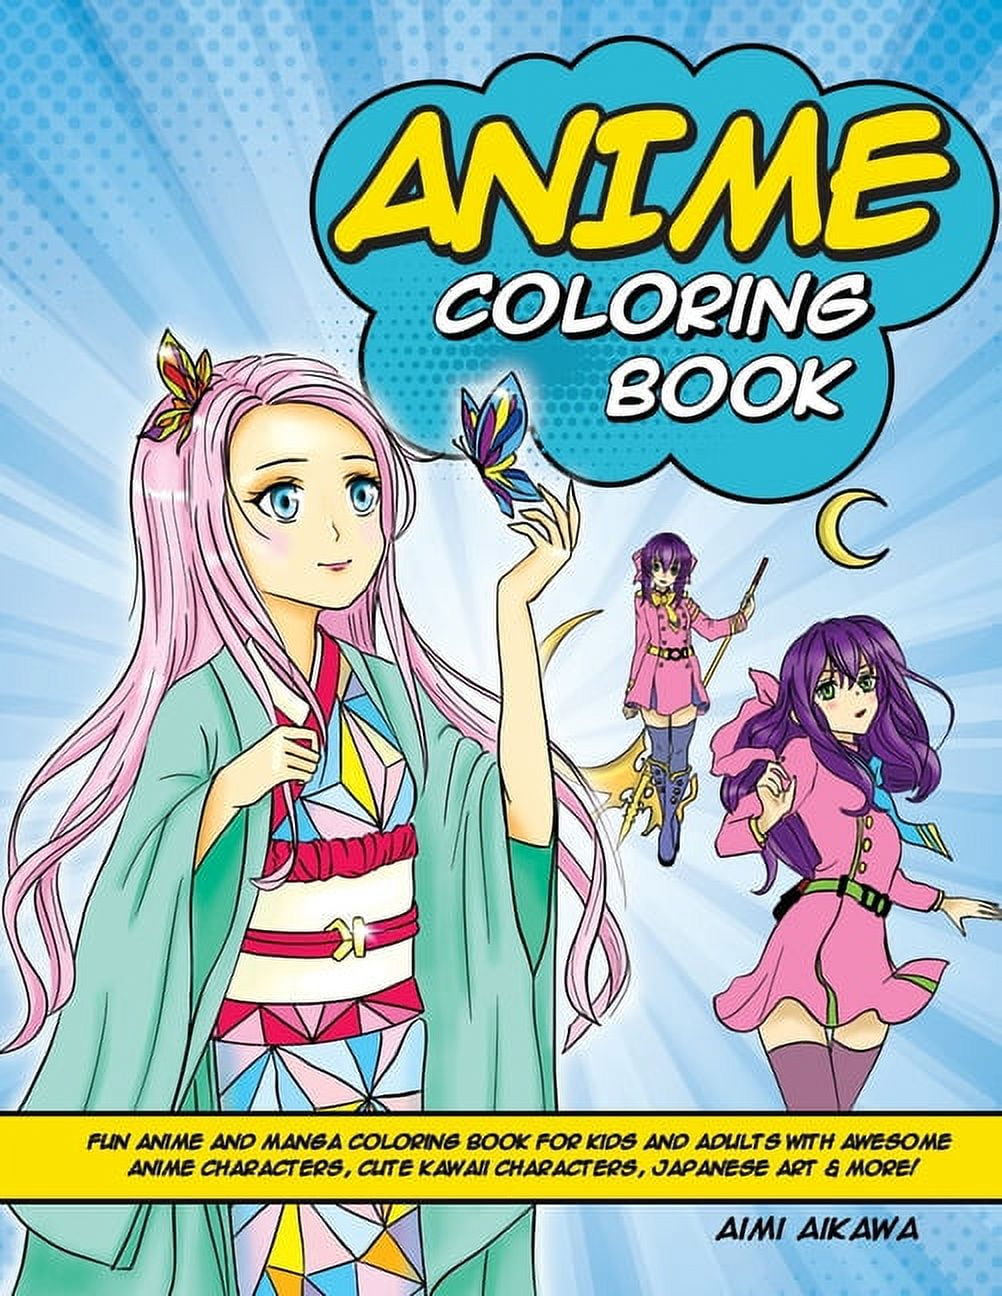 Anime Characters Art Box for Kids & Adults